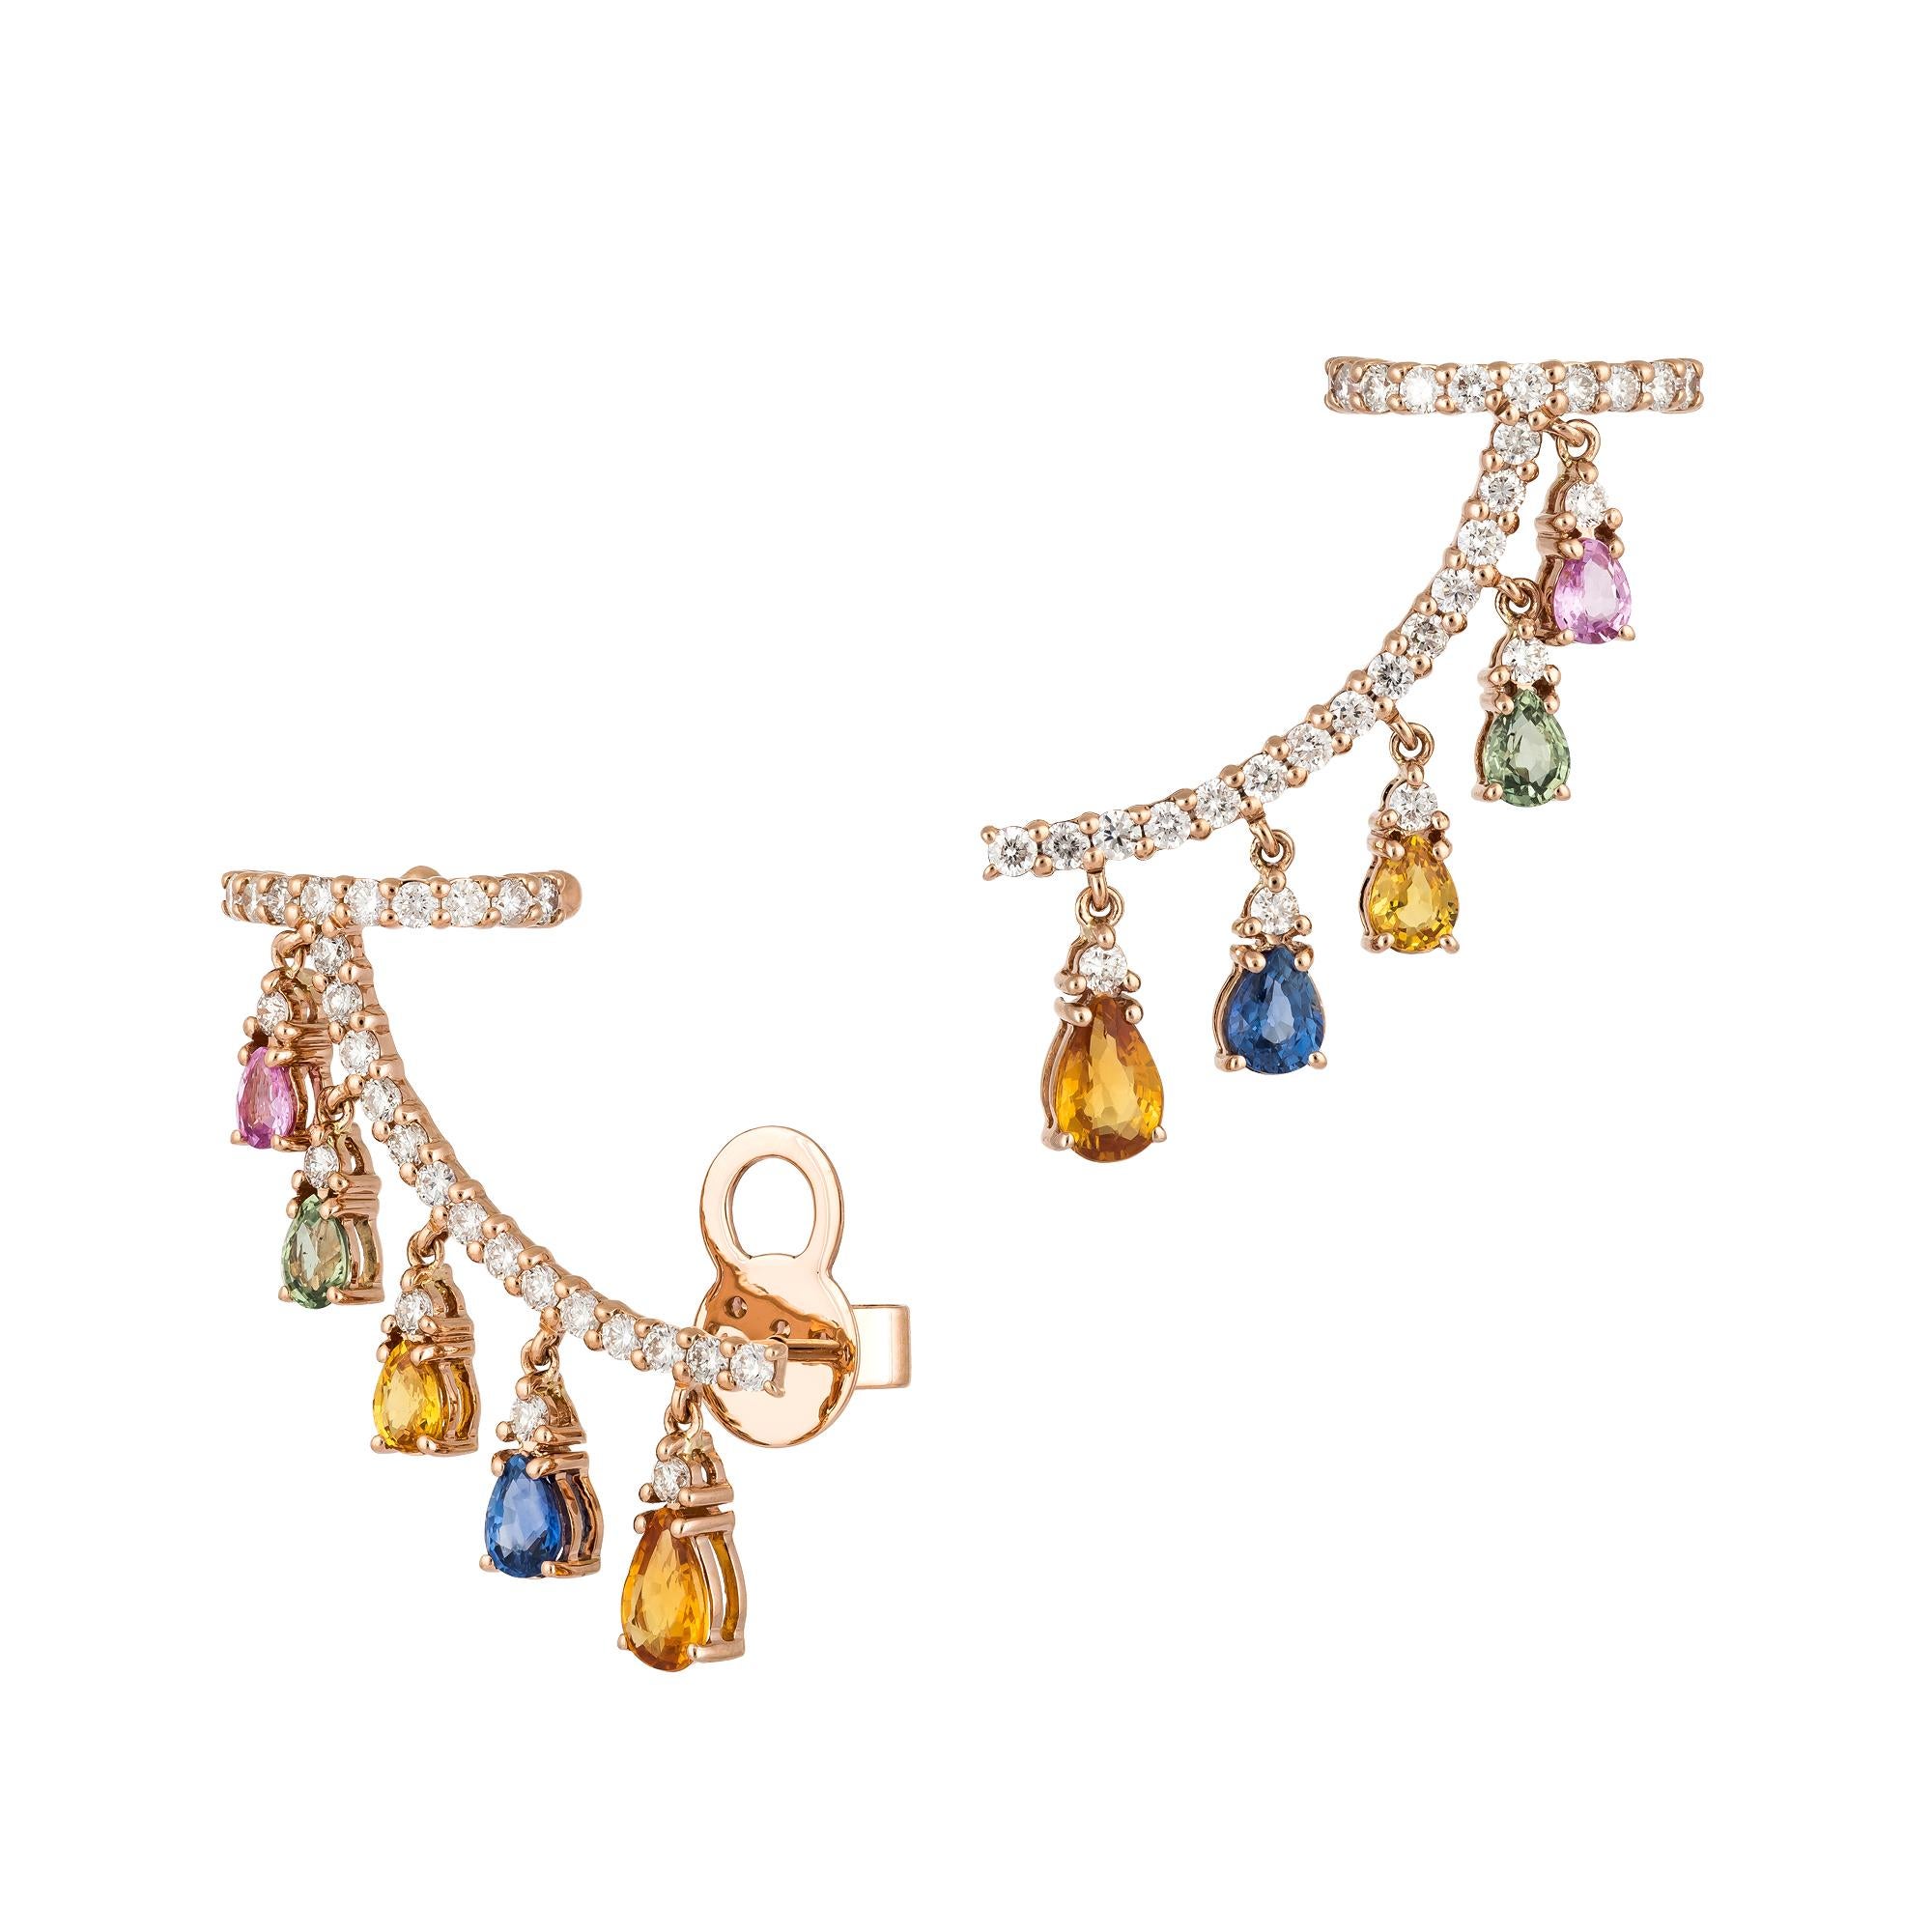 EARRING 18K Rose Gold Diamond 1.19 Cts/60 Pieces, Multi Sapphire 2.54 Cts/10 Pieces
